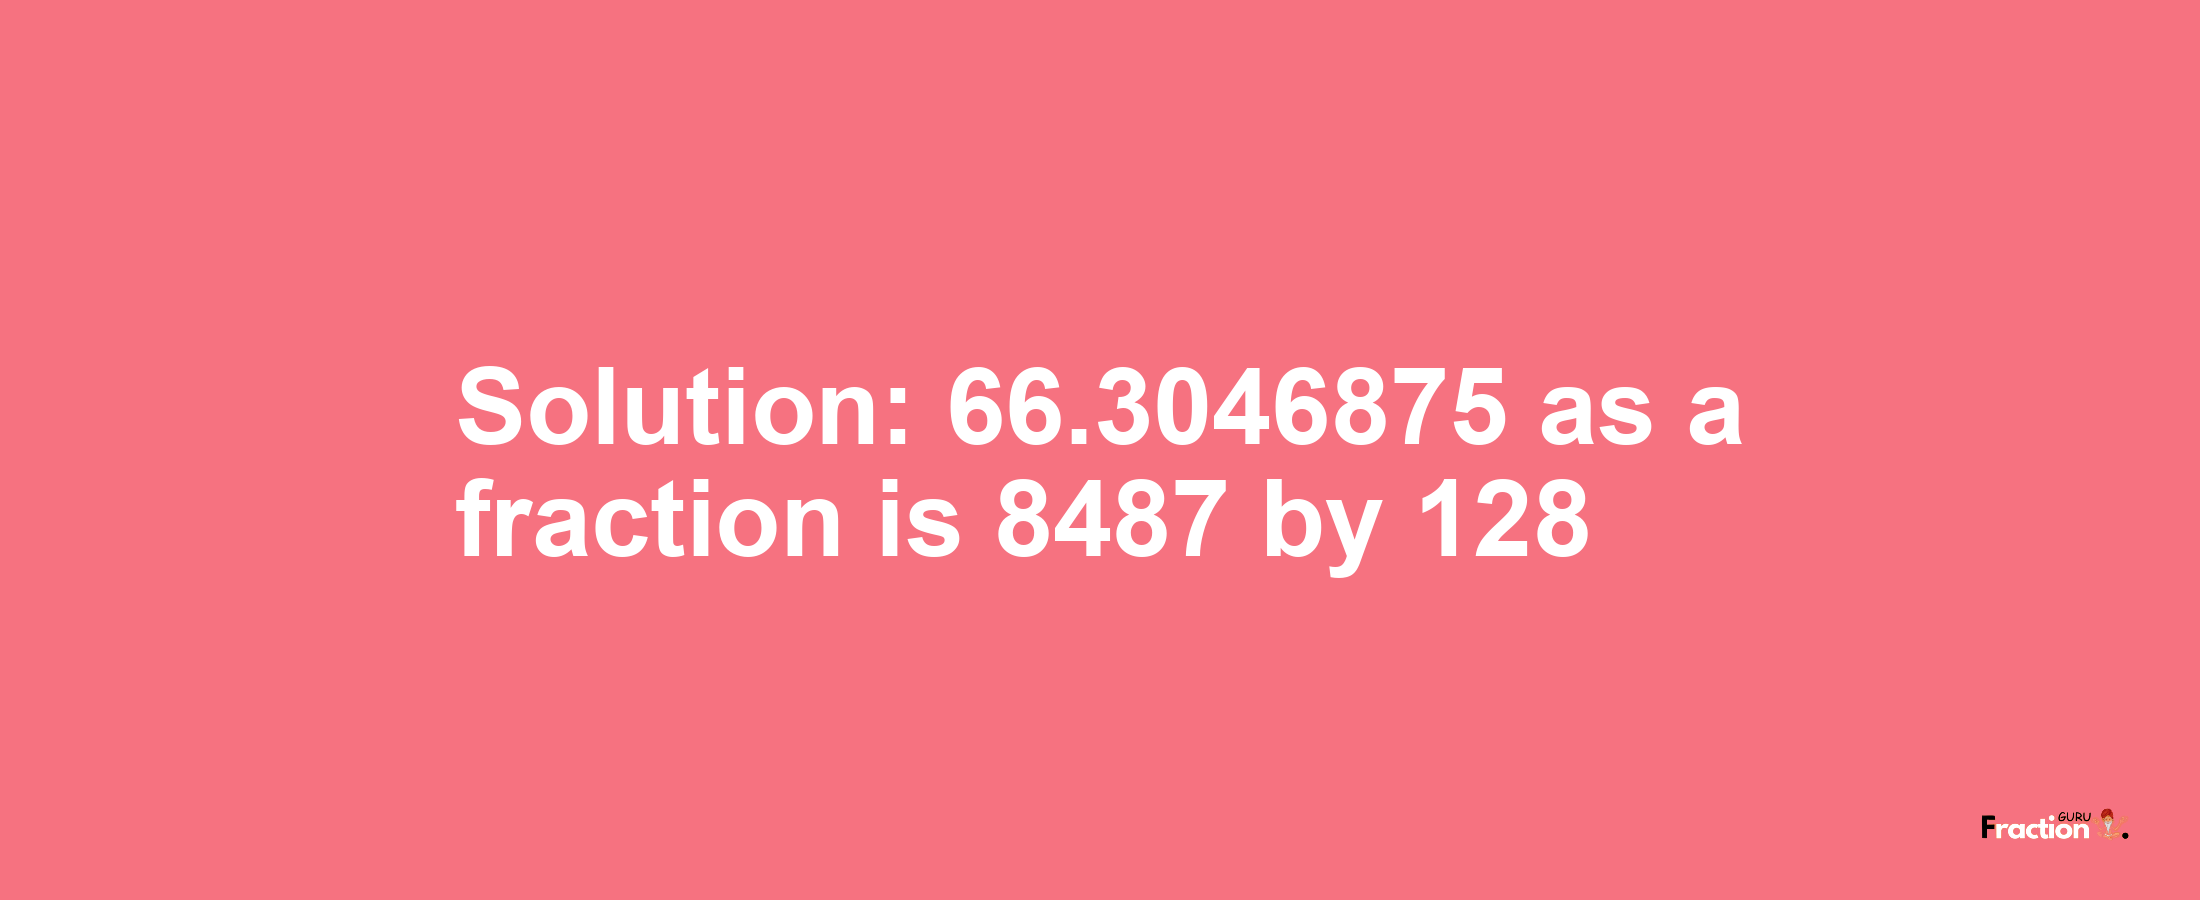 Solution:66.3046875 as a fraction is 8487/128